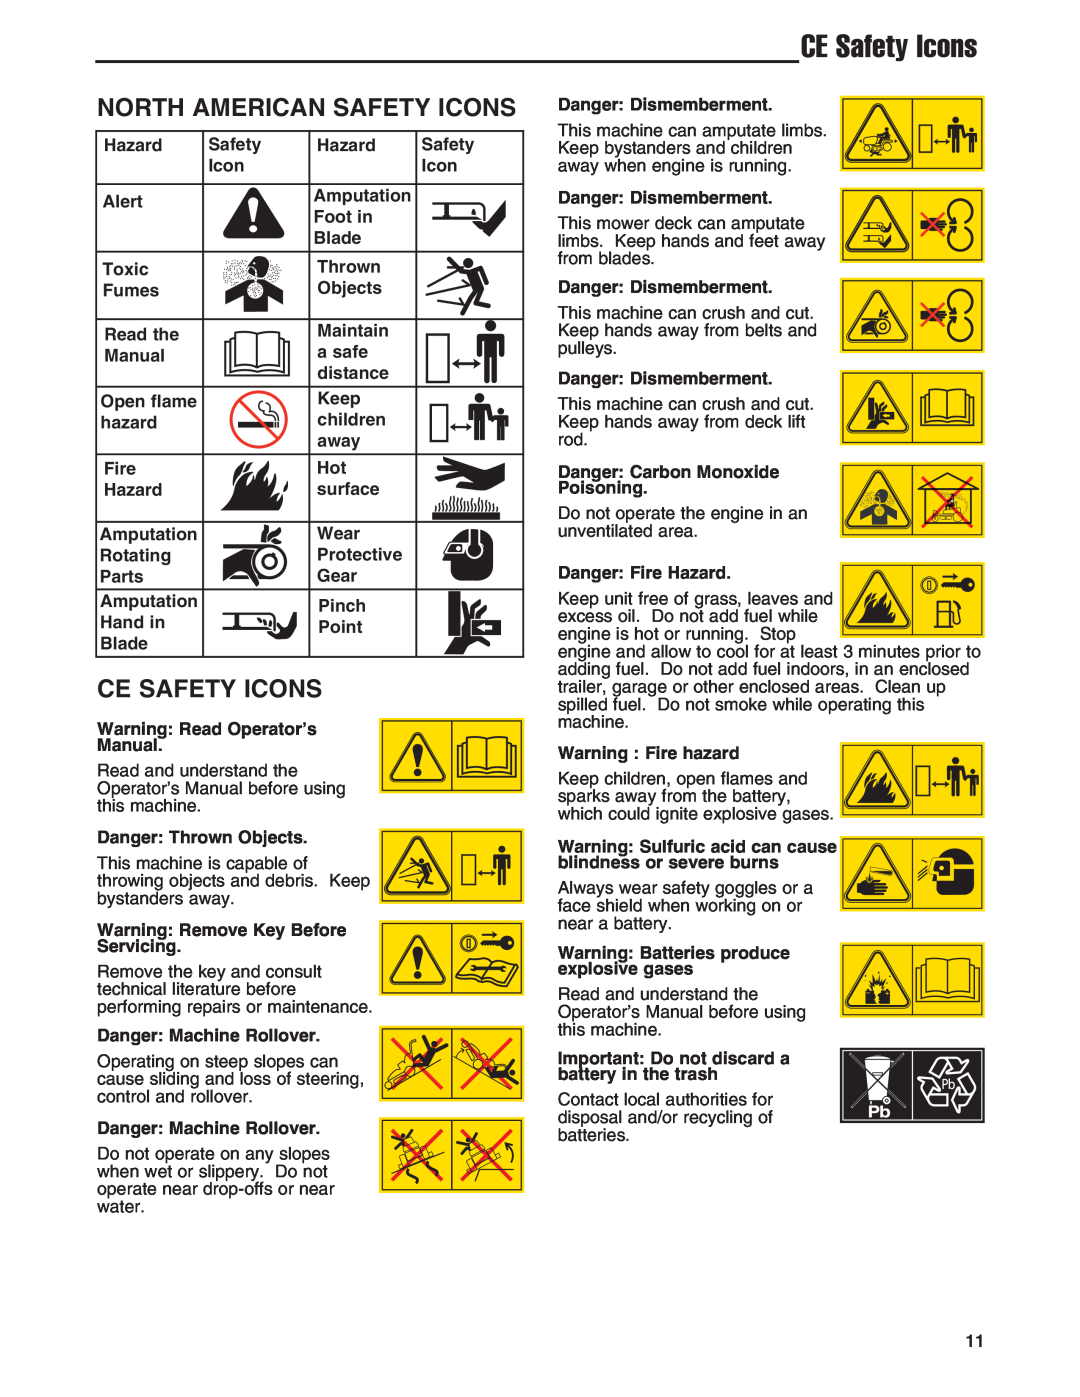 Ferris Industries 5900638, 5900645, 5900636, 5900646, 5900635 CE Safety Icons, North American Safety Icons, Ce Safety Icons 